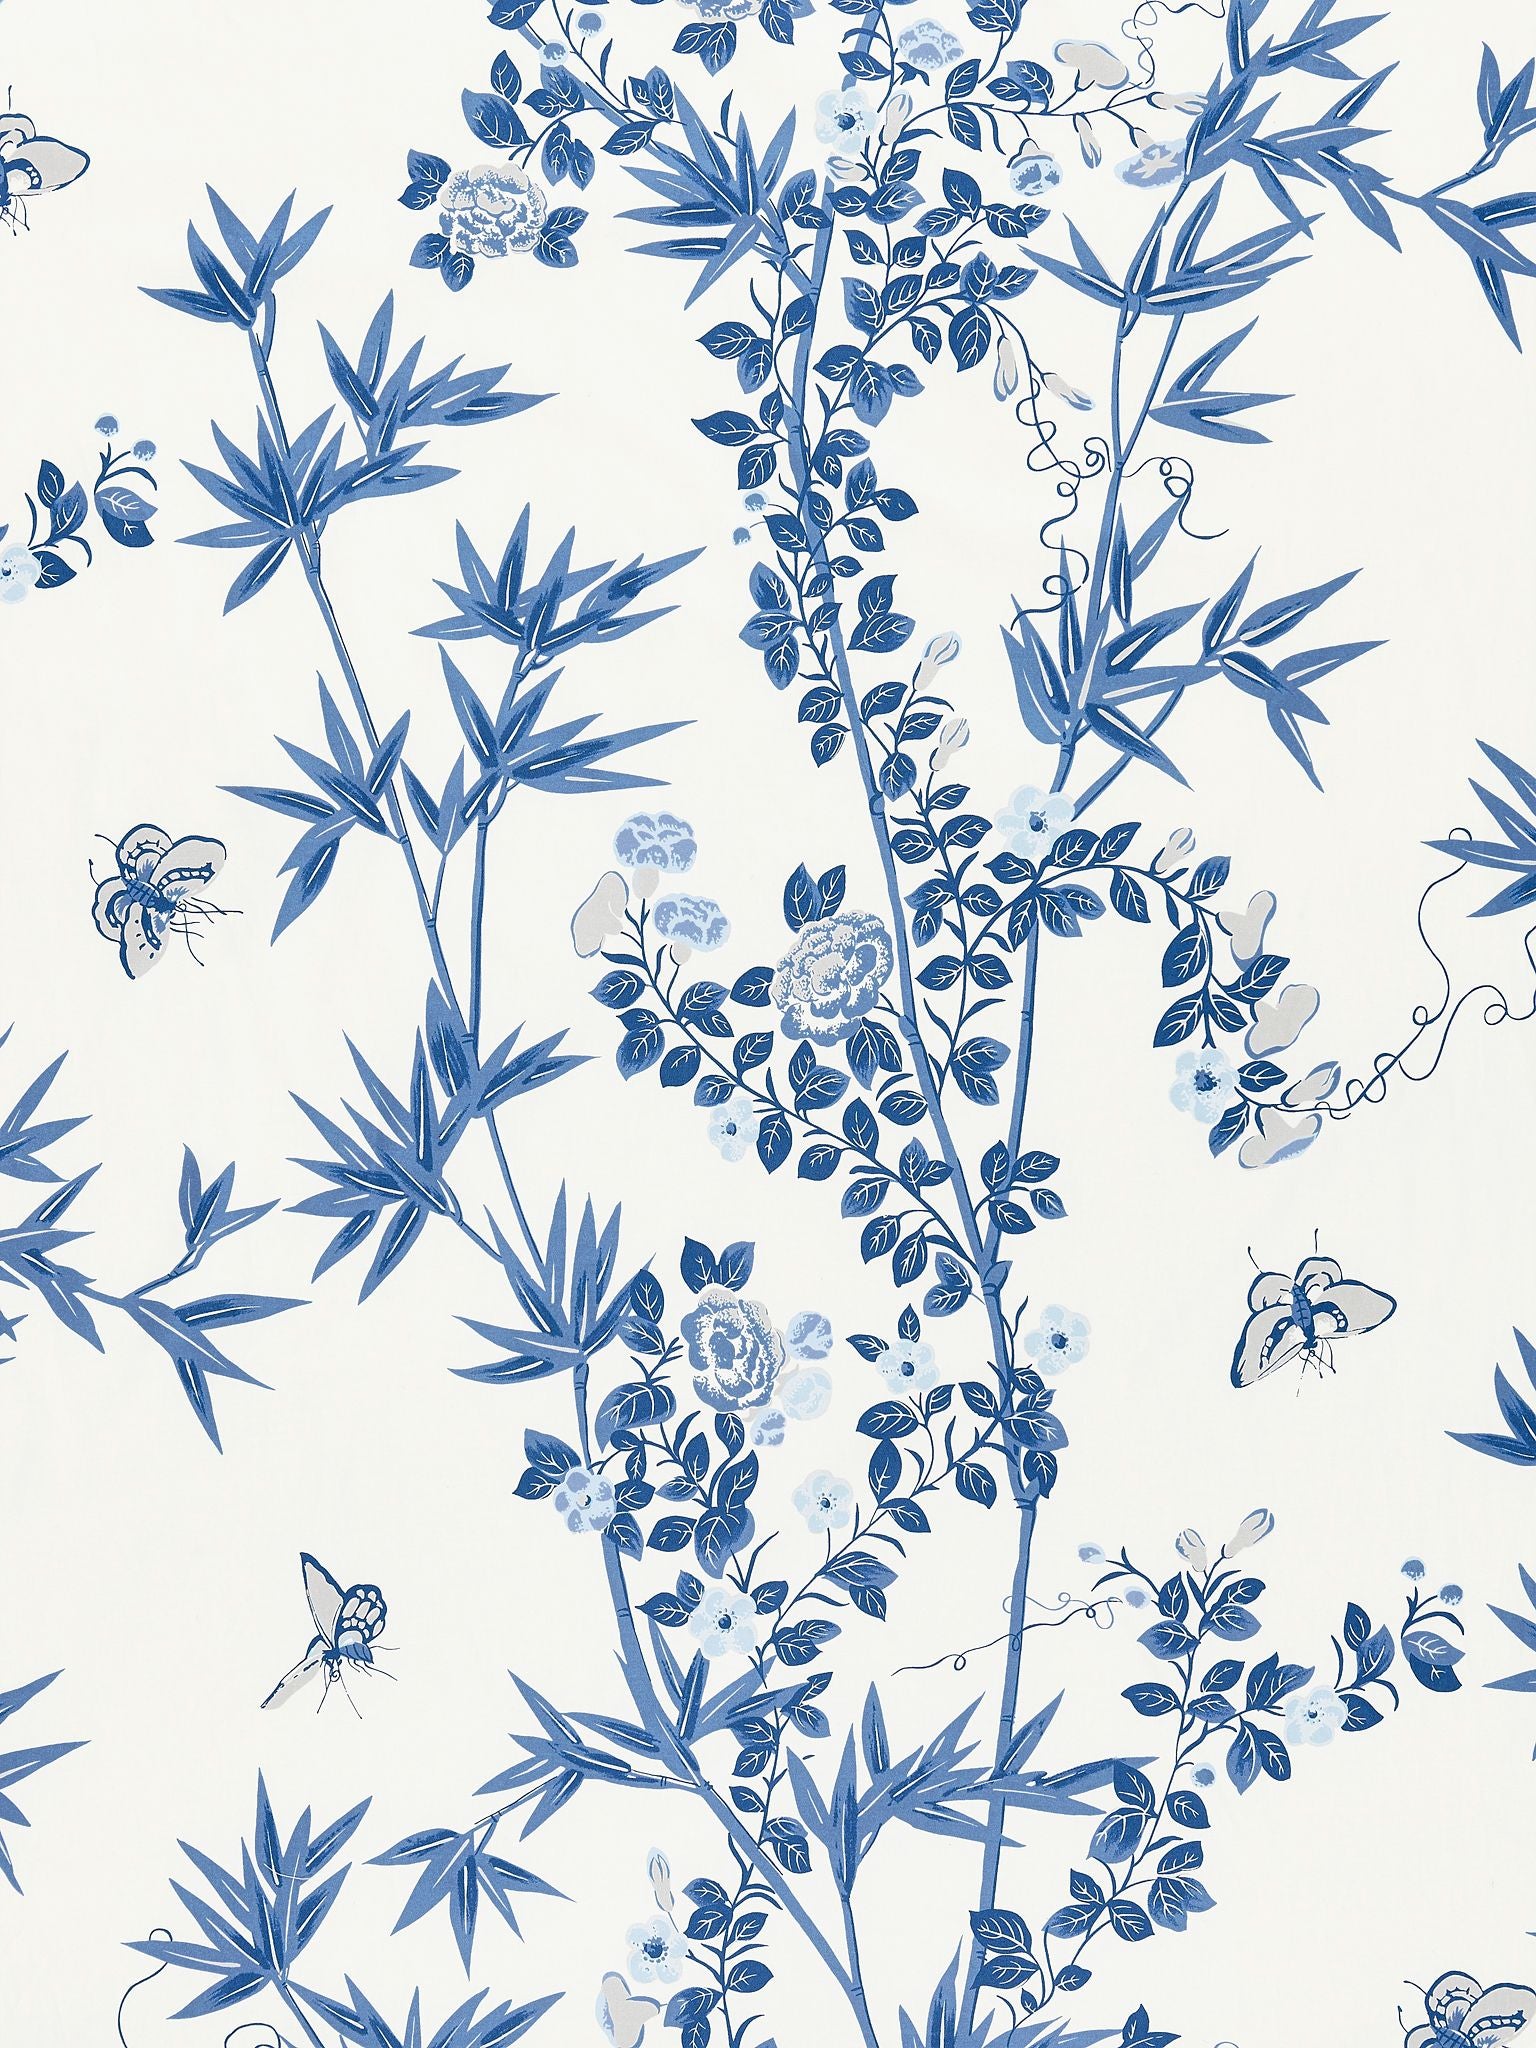 Jardin De Chine fabric in porcelain color - pattern number SC 000216608 - by Scalamandre in the Scalamandre Fabrics Book 1 collection